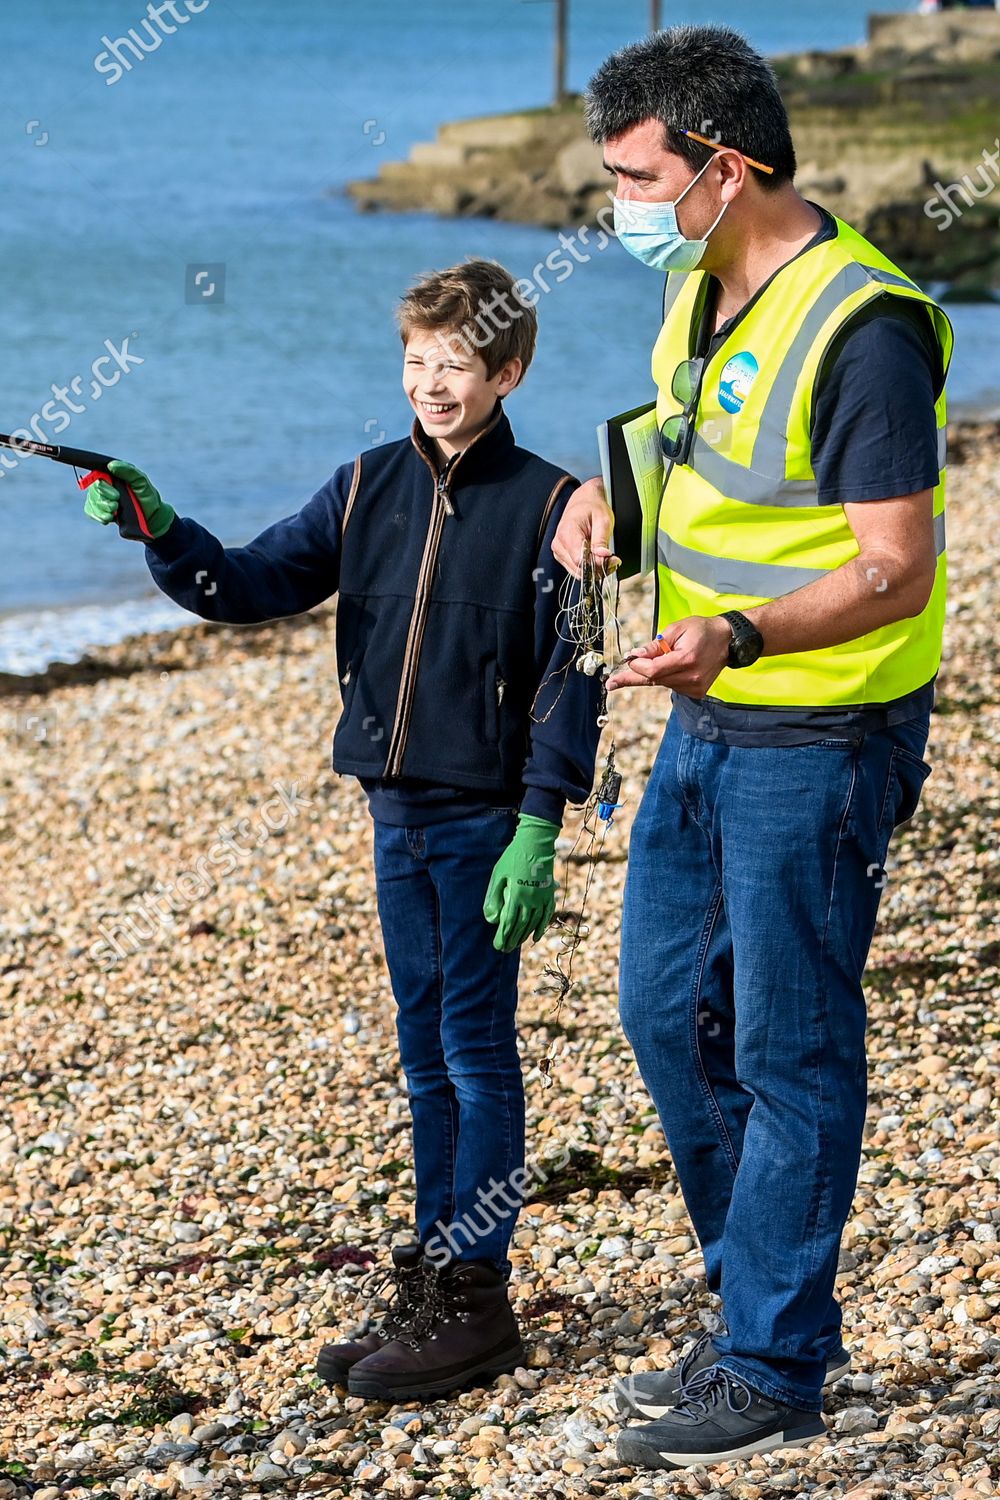 prince-edward-and-sophie-countess-of-wessex-great-british-beach-clean-southsea-beach-portsmouth-uk-shutterstock-editorial-10782998at.jpg